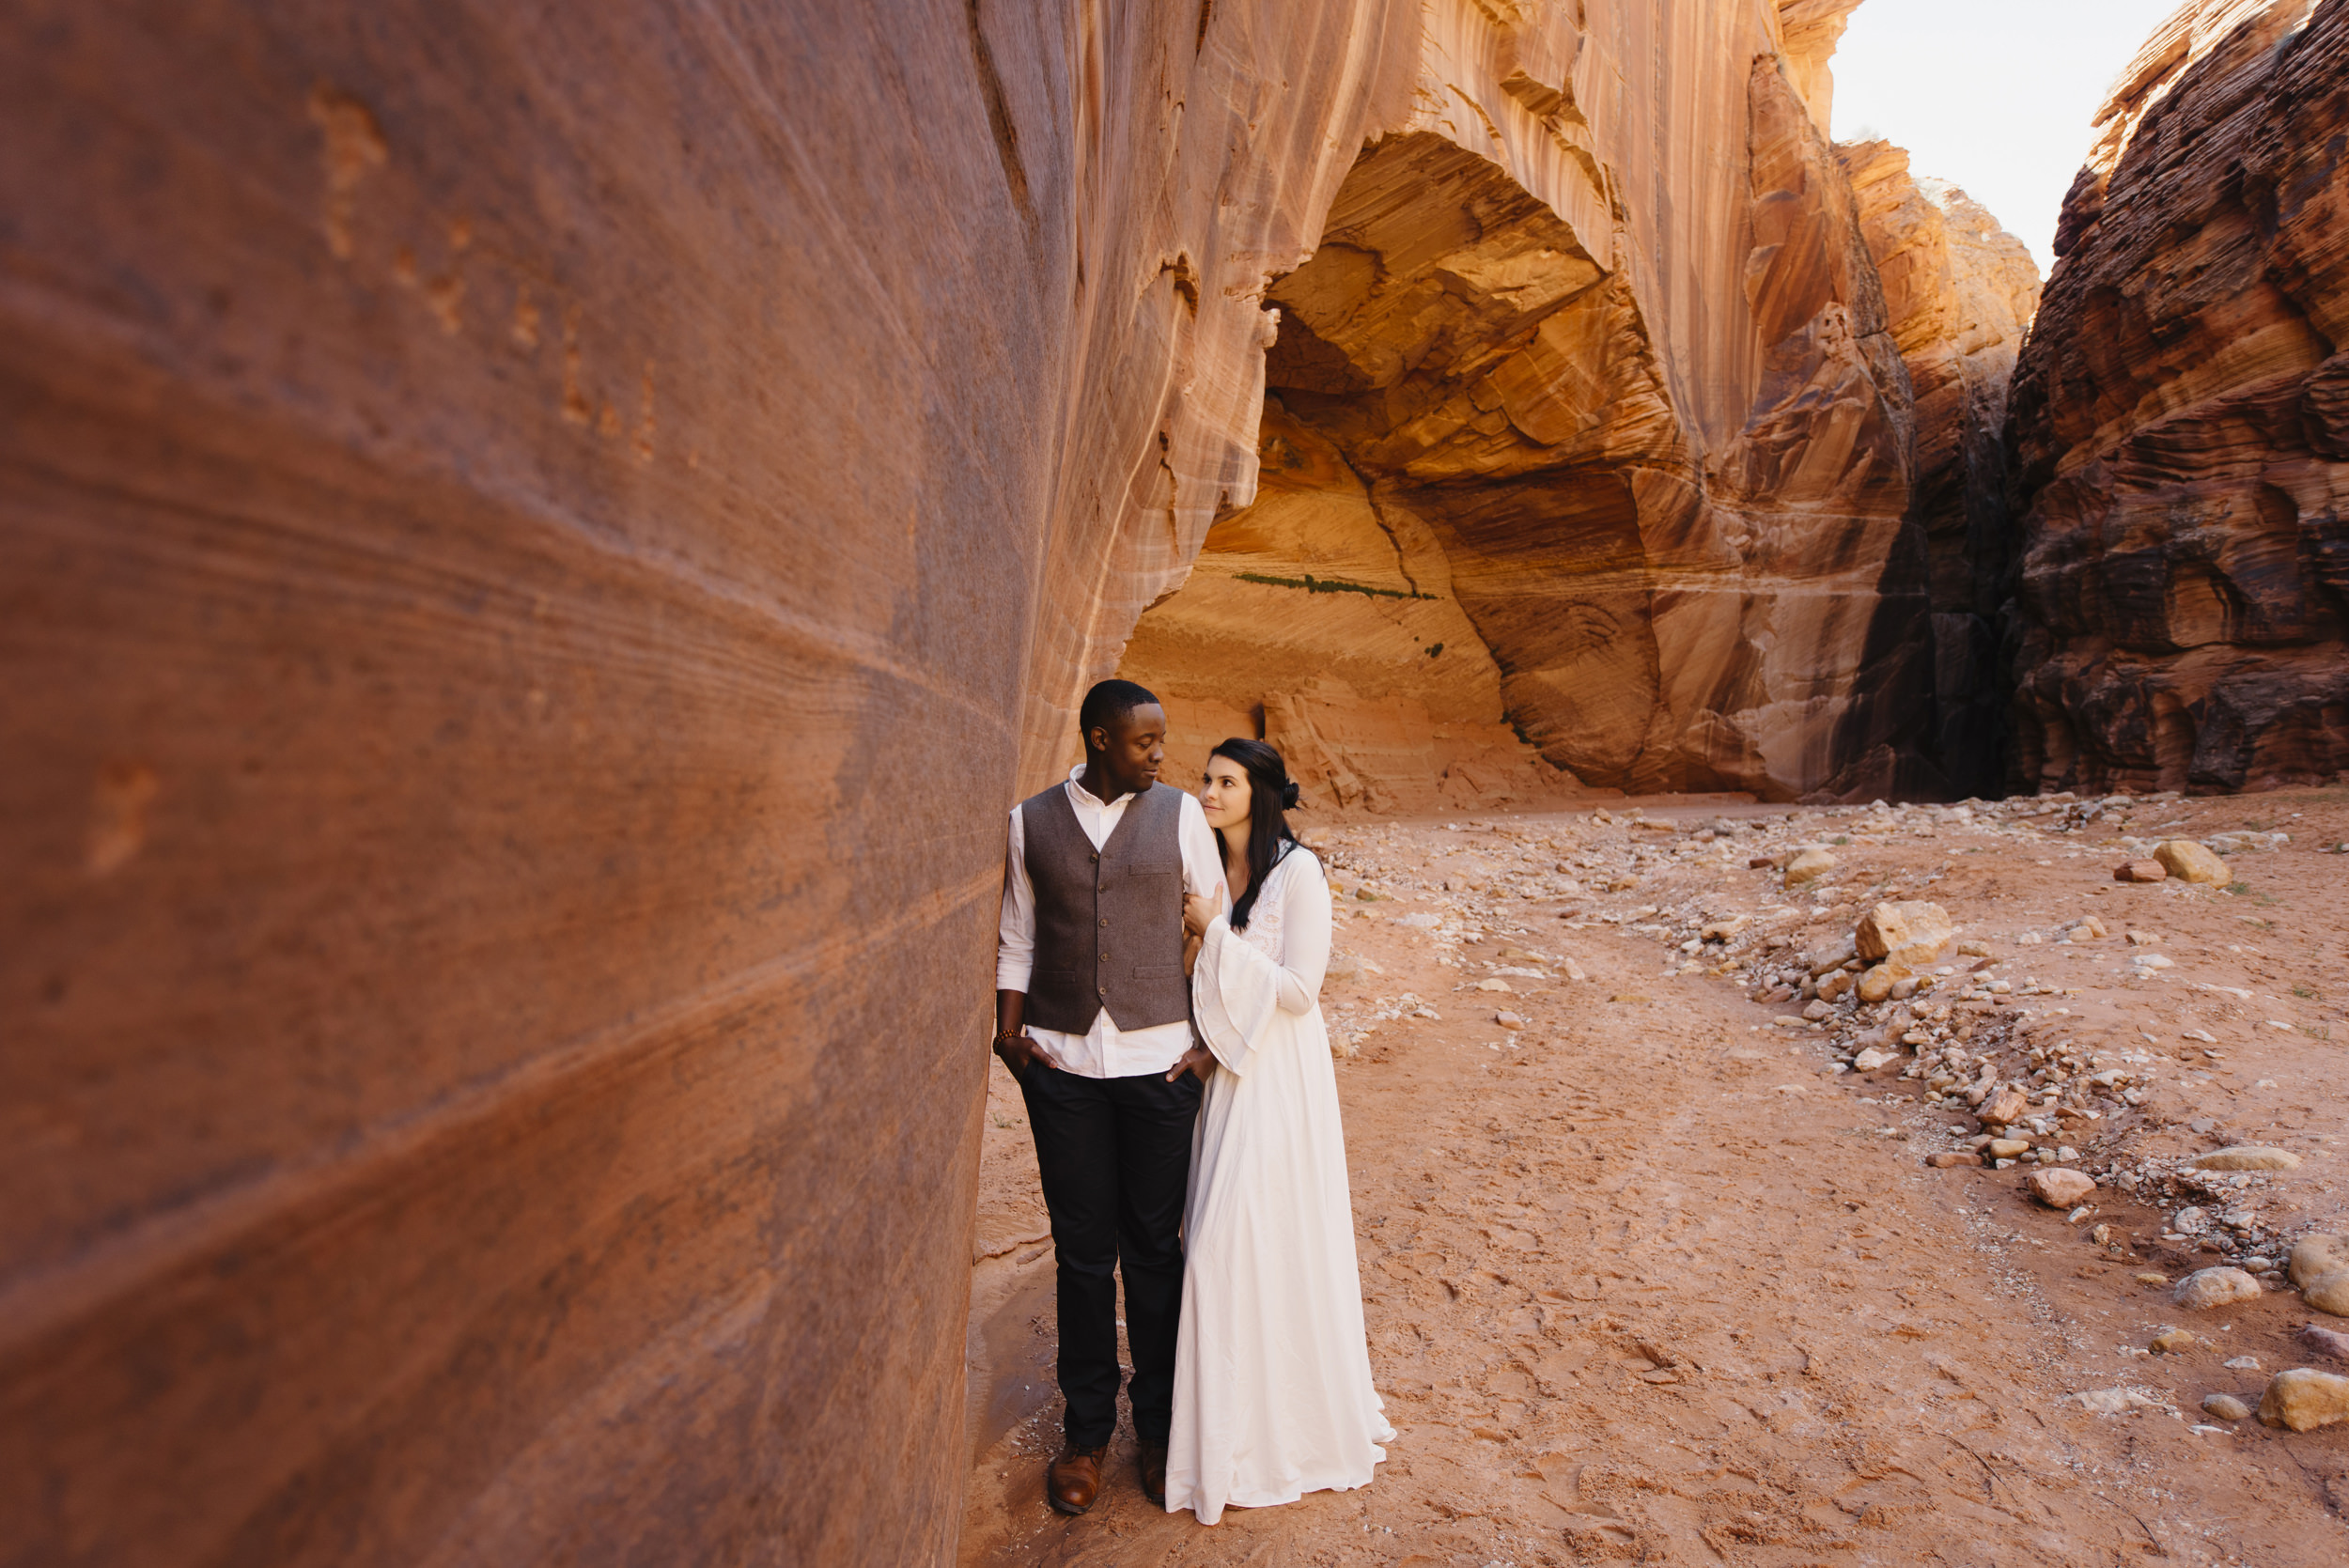 A couple embraces beside the red rock of Antelope Canyon during their Adventure couples photography session by Utah Destination Elopement Photographers Colby and Jess